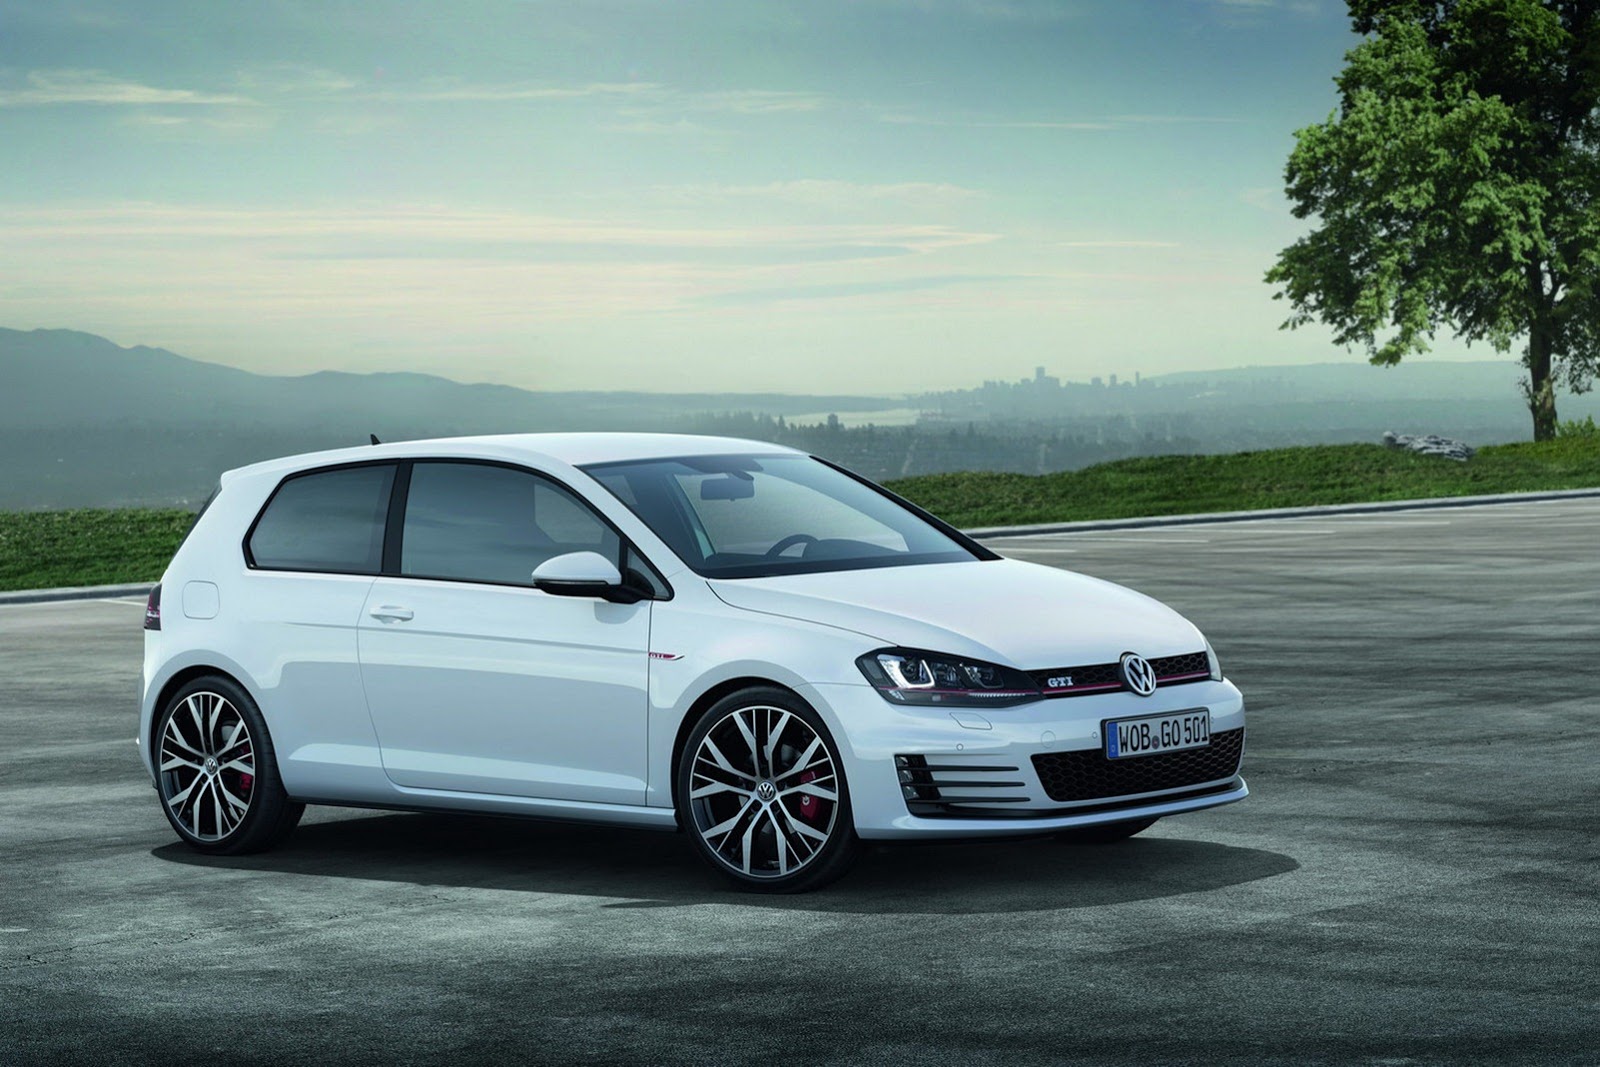 The new ABT Golf VII GTD – a great top diesel - Audi Tuning, VW